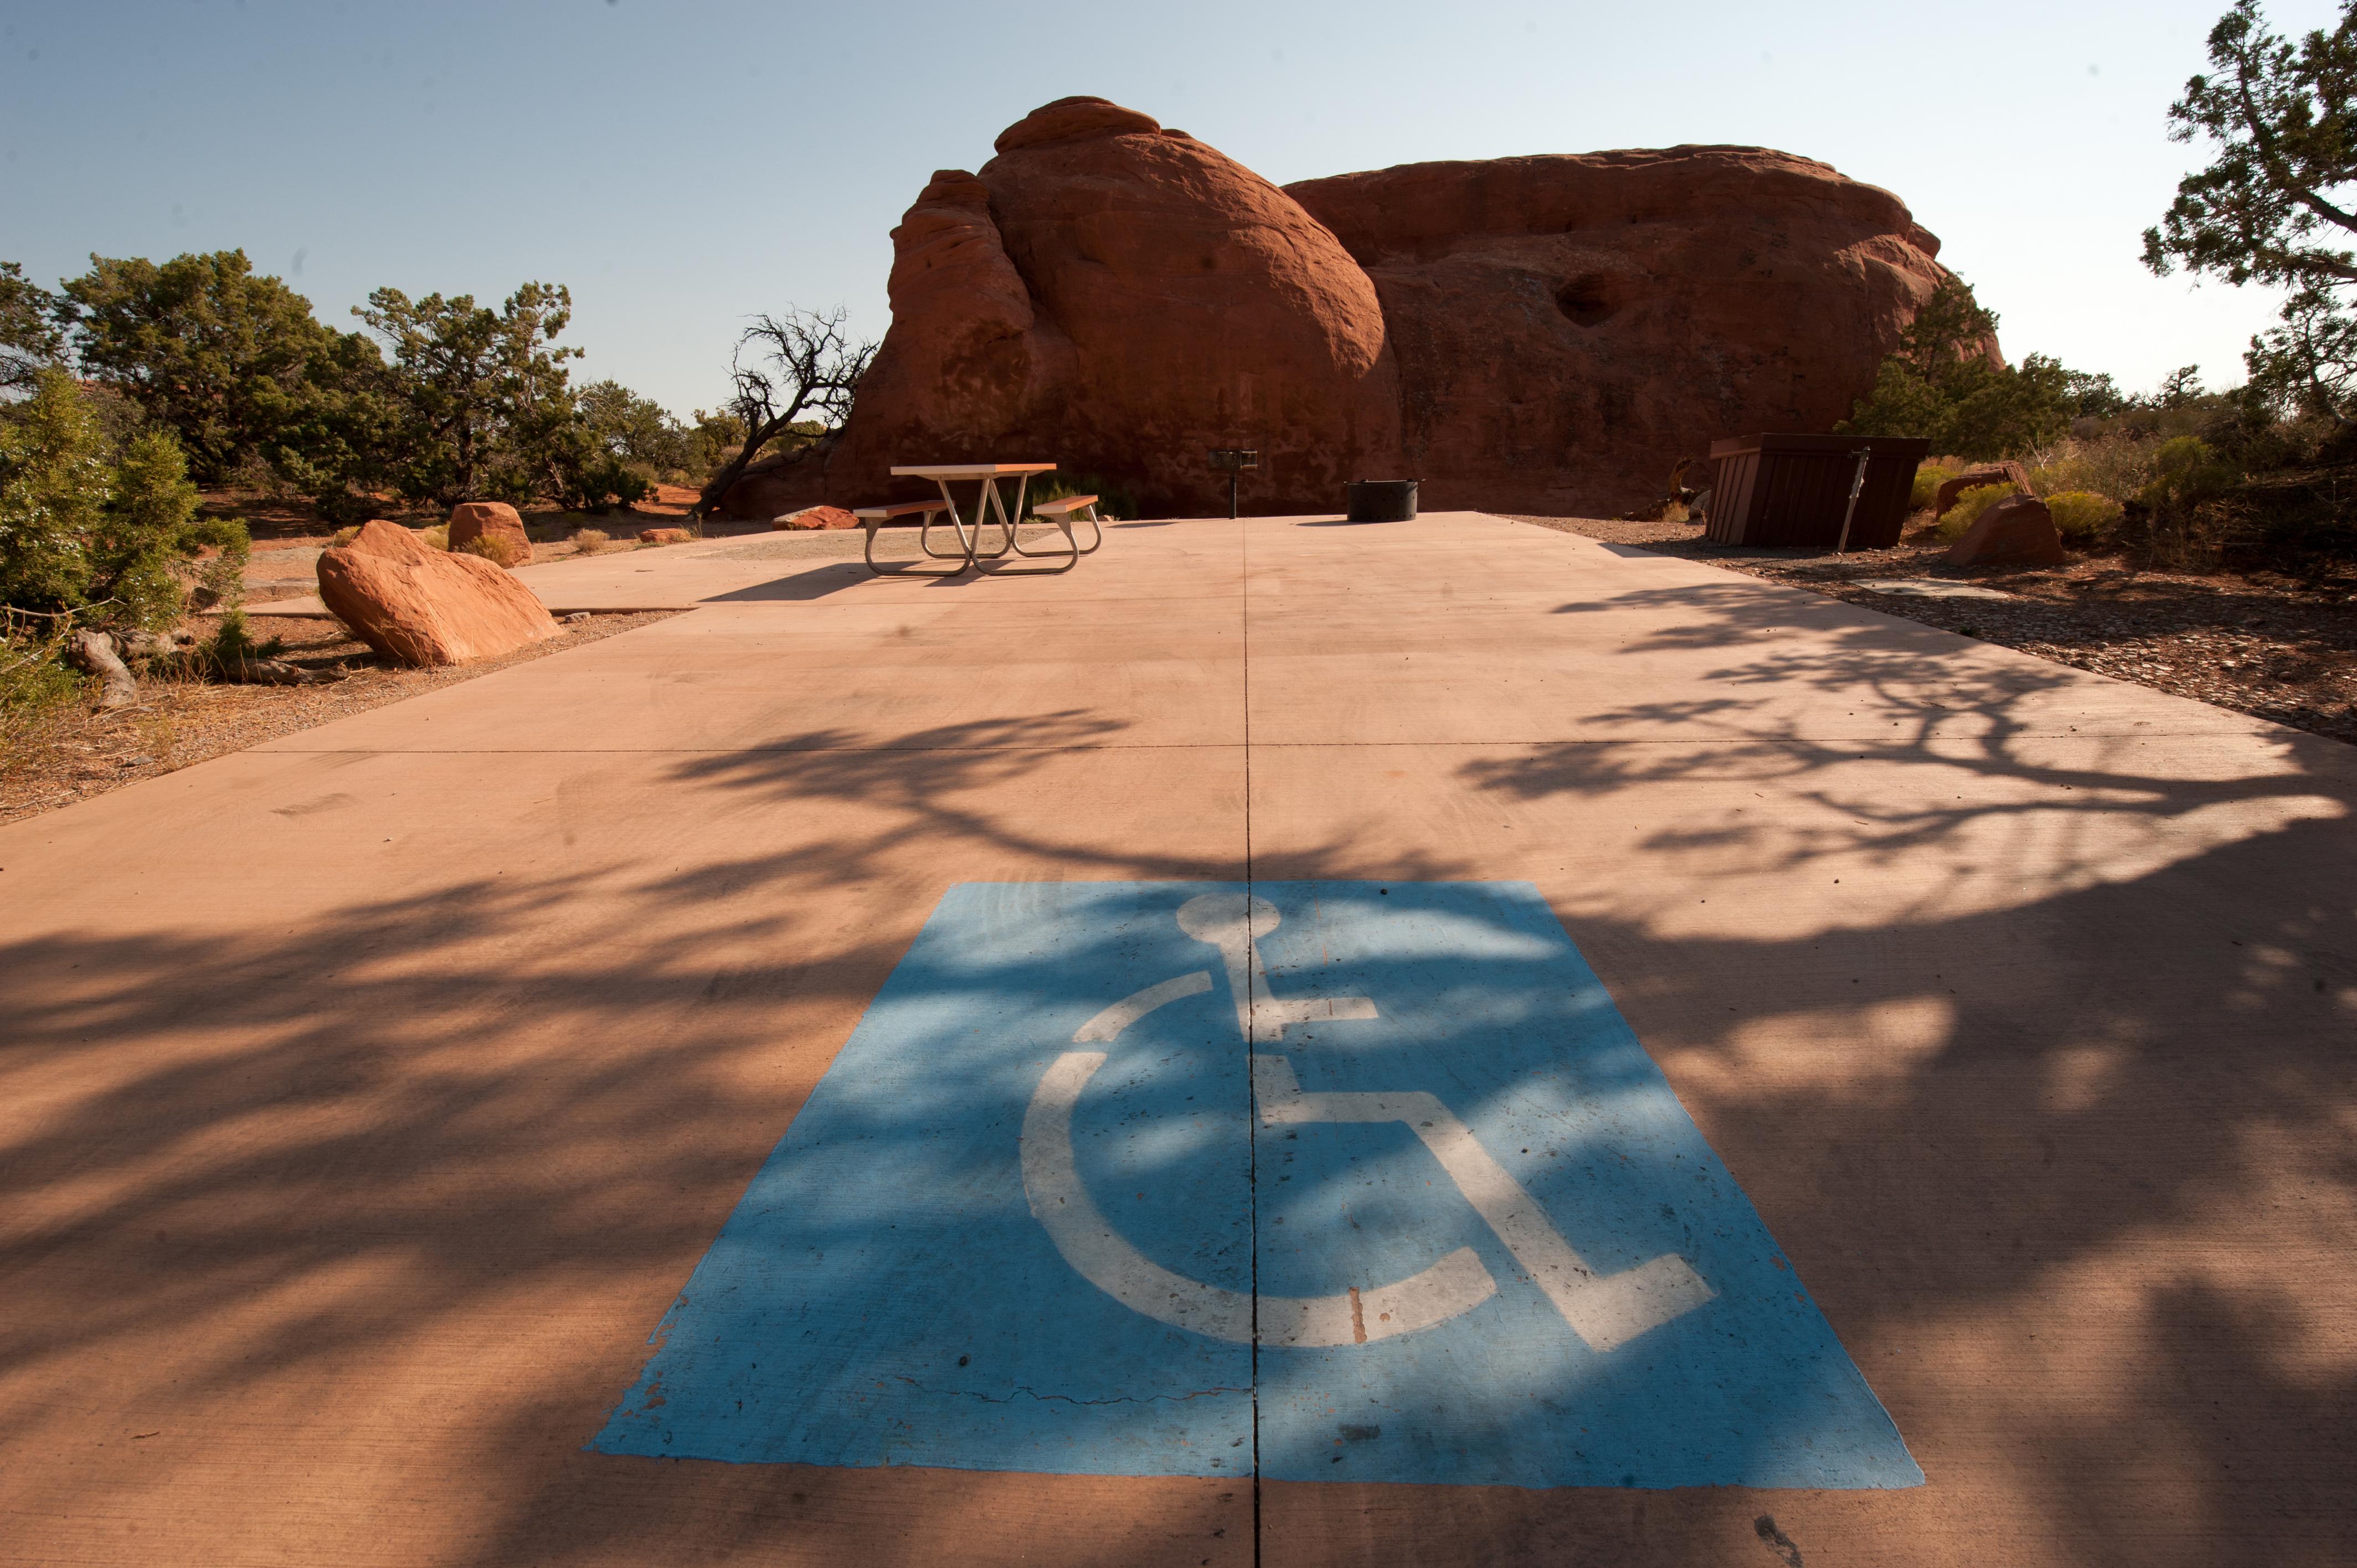 a paved campsite with a large blue accessible image painted on the ground